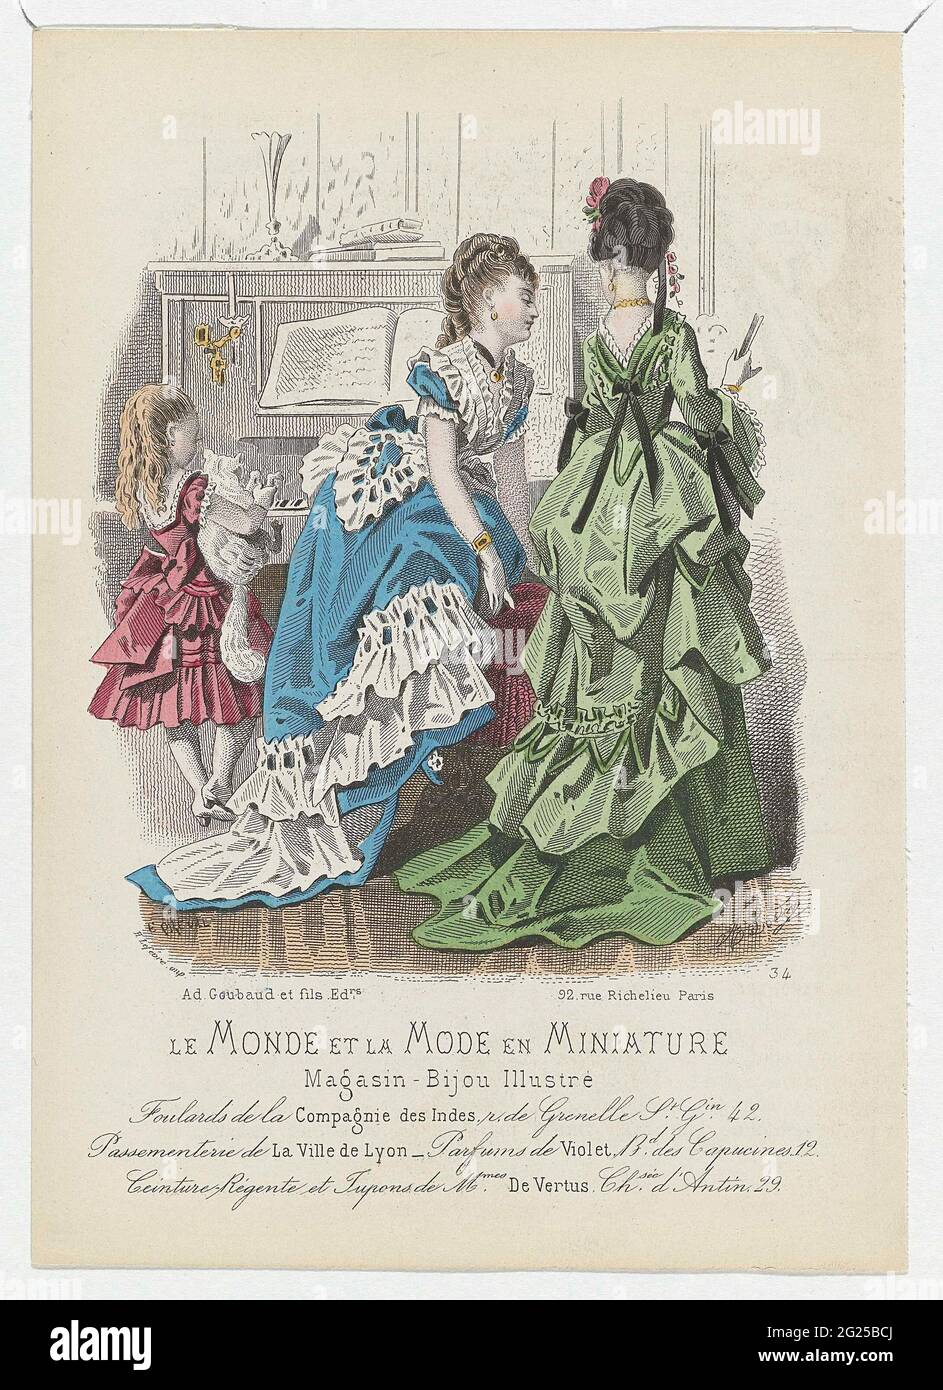 Le Monde Et La Fashion And Miniature 1873 No 34 Foulards De La Compagni Two Women And A Child In Interior Dressed In Dresses With Tournure Made From Fabrics From Compagnie